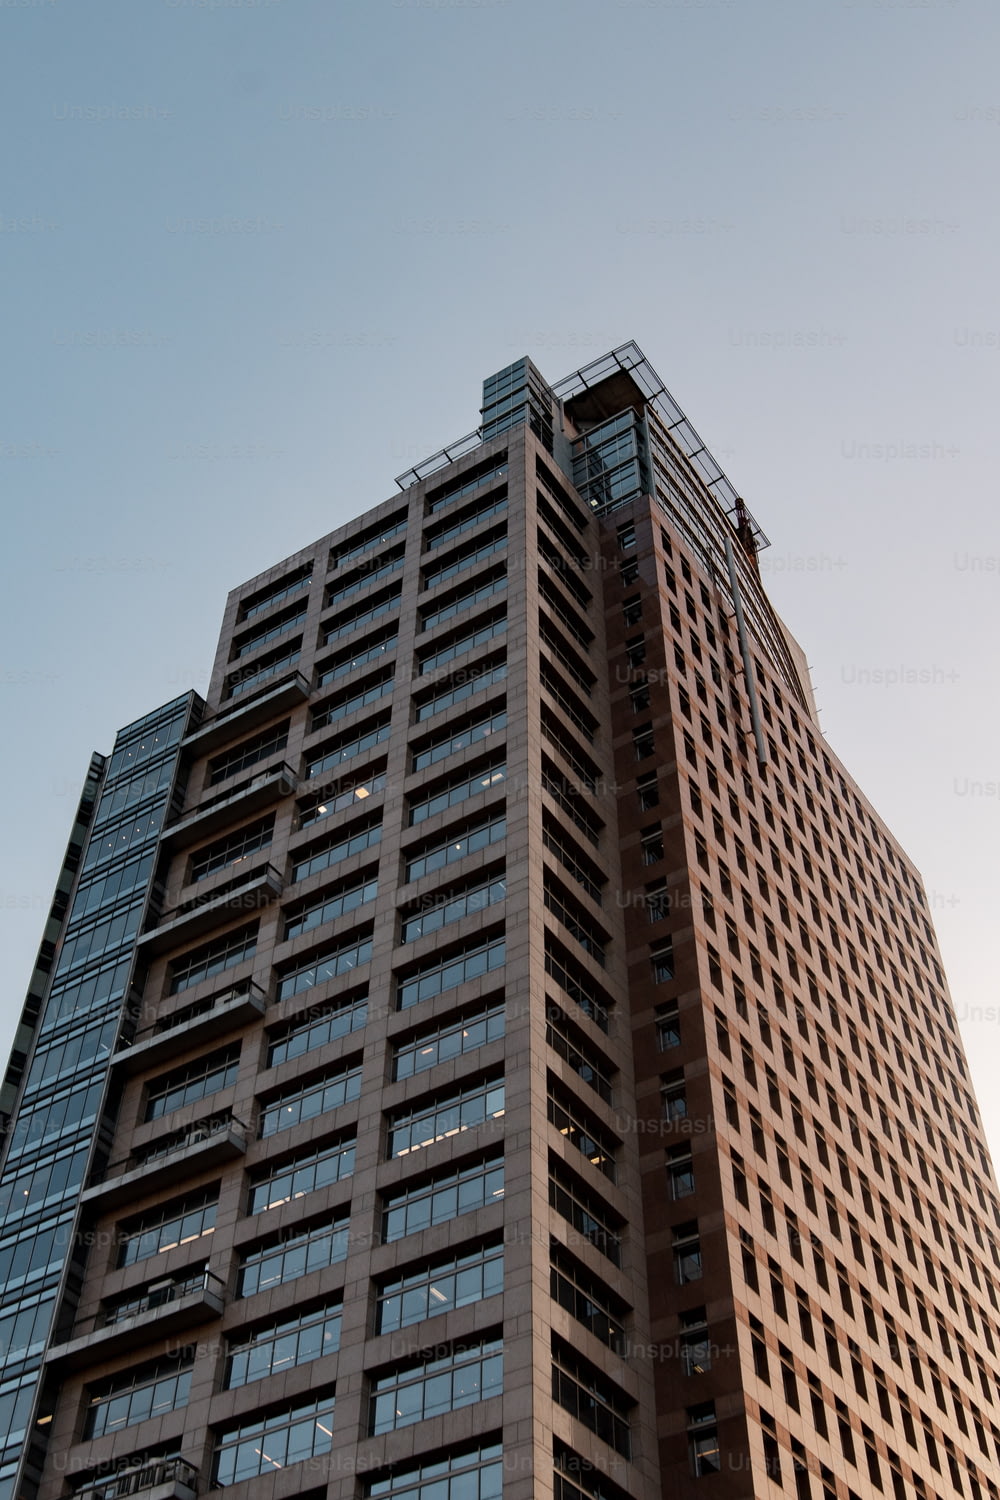 a tall brown building with lots of windows